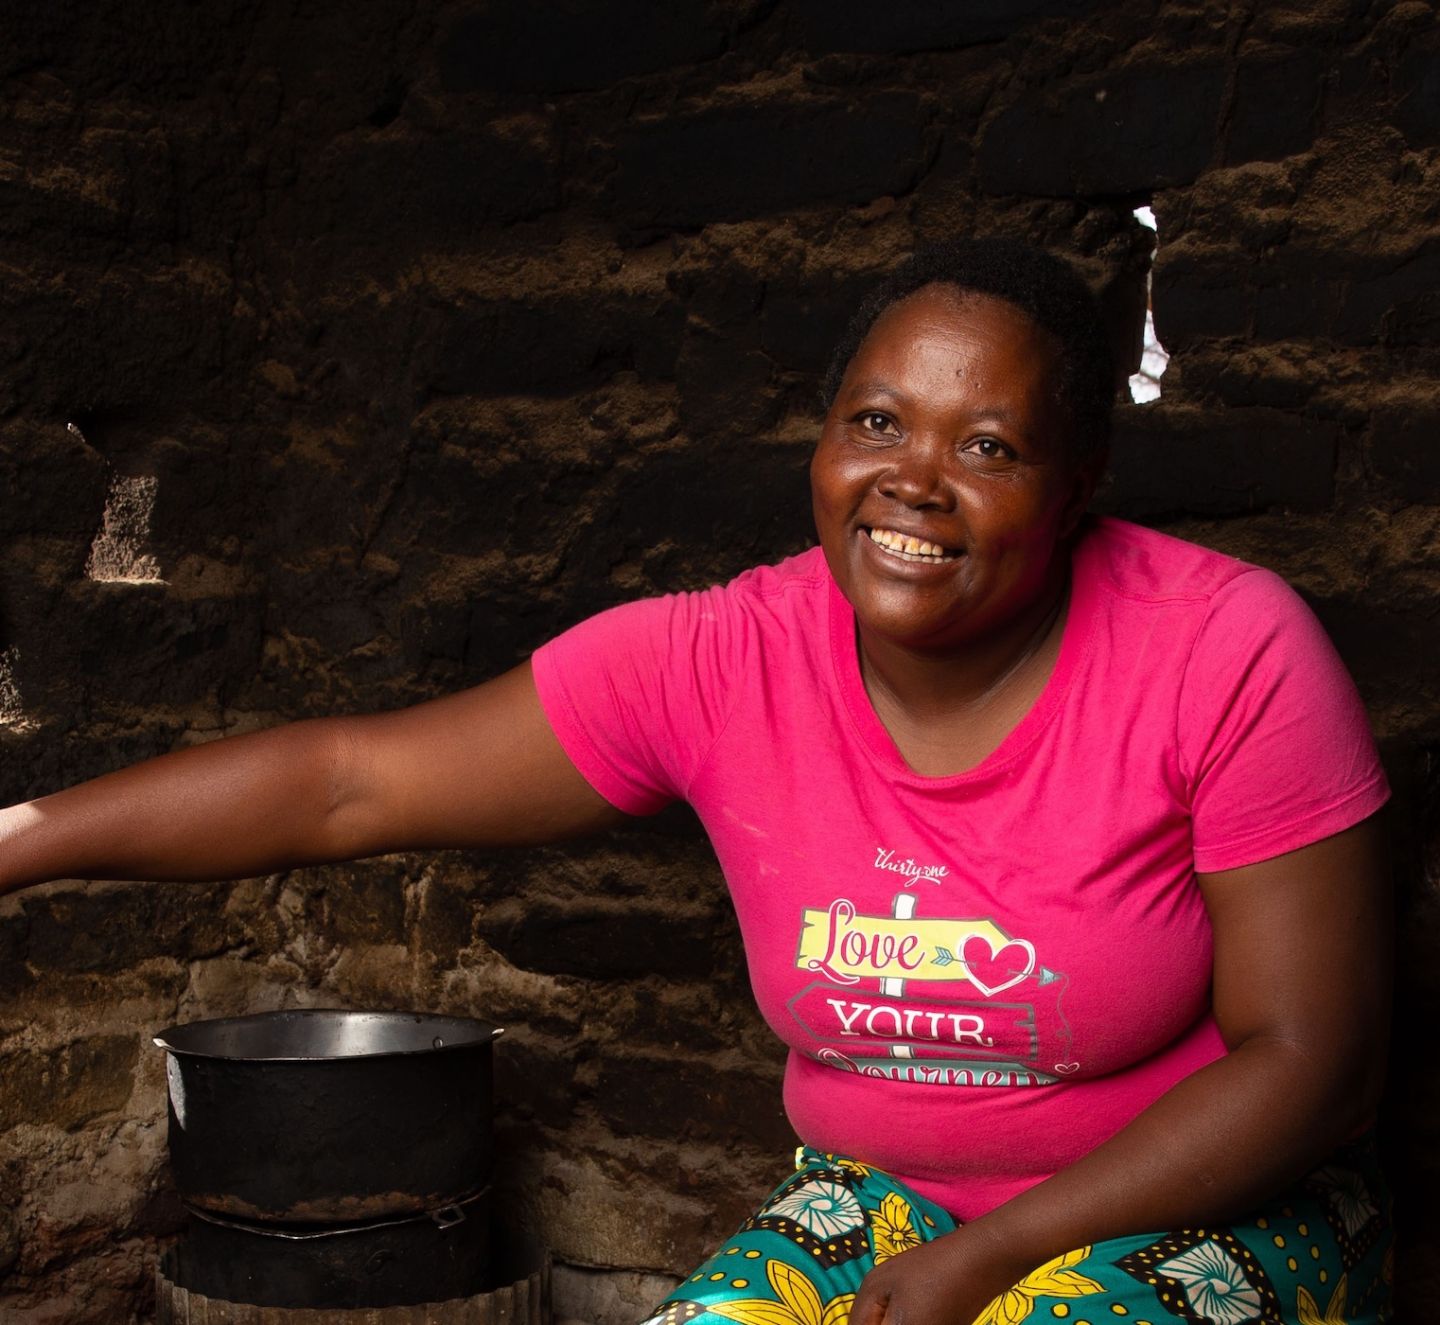 Igniting change: meet the women behind the stoves